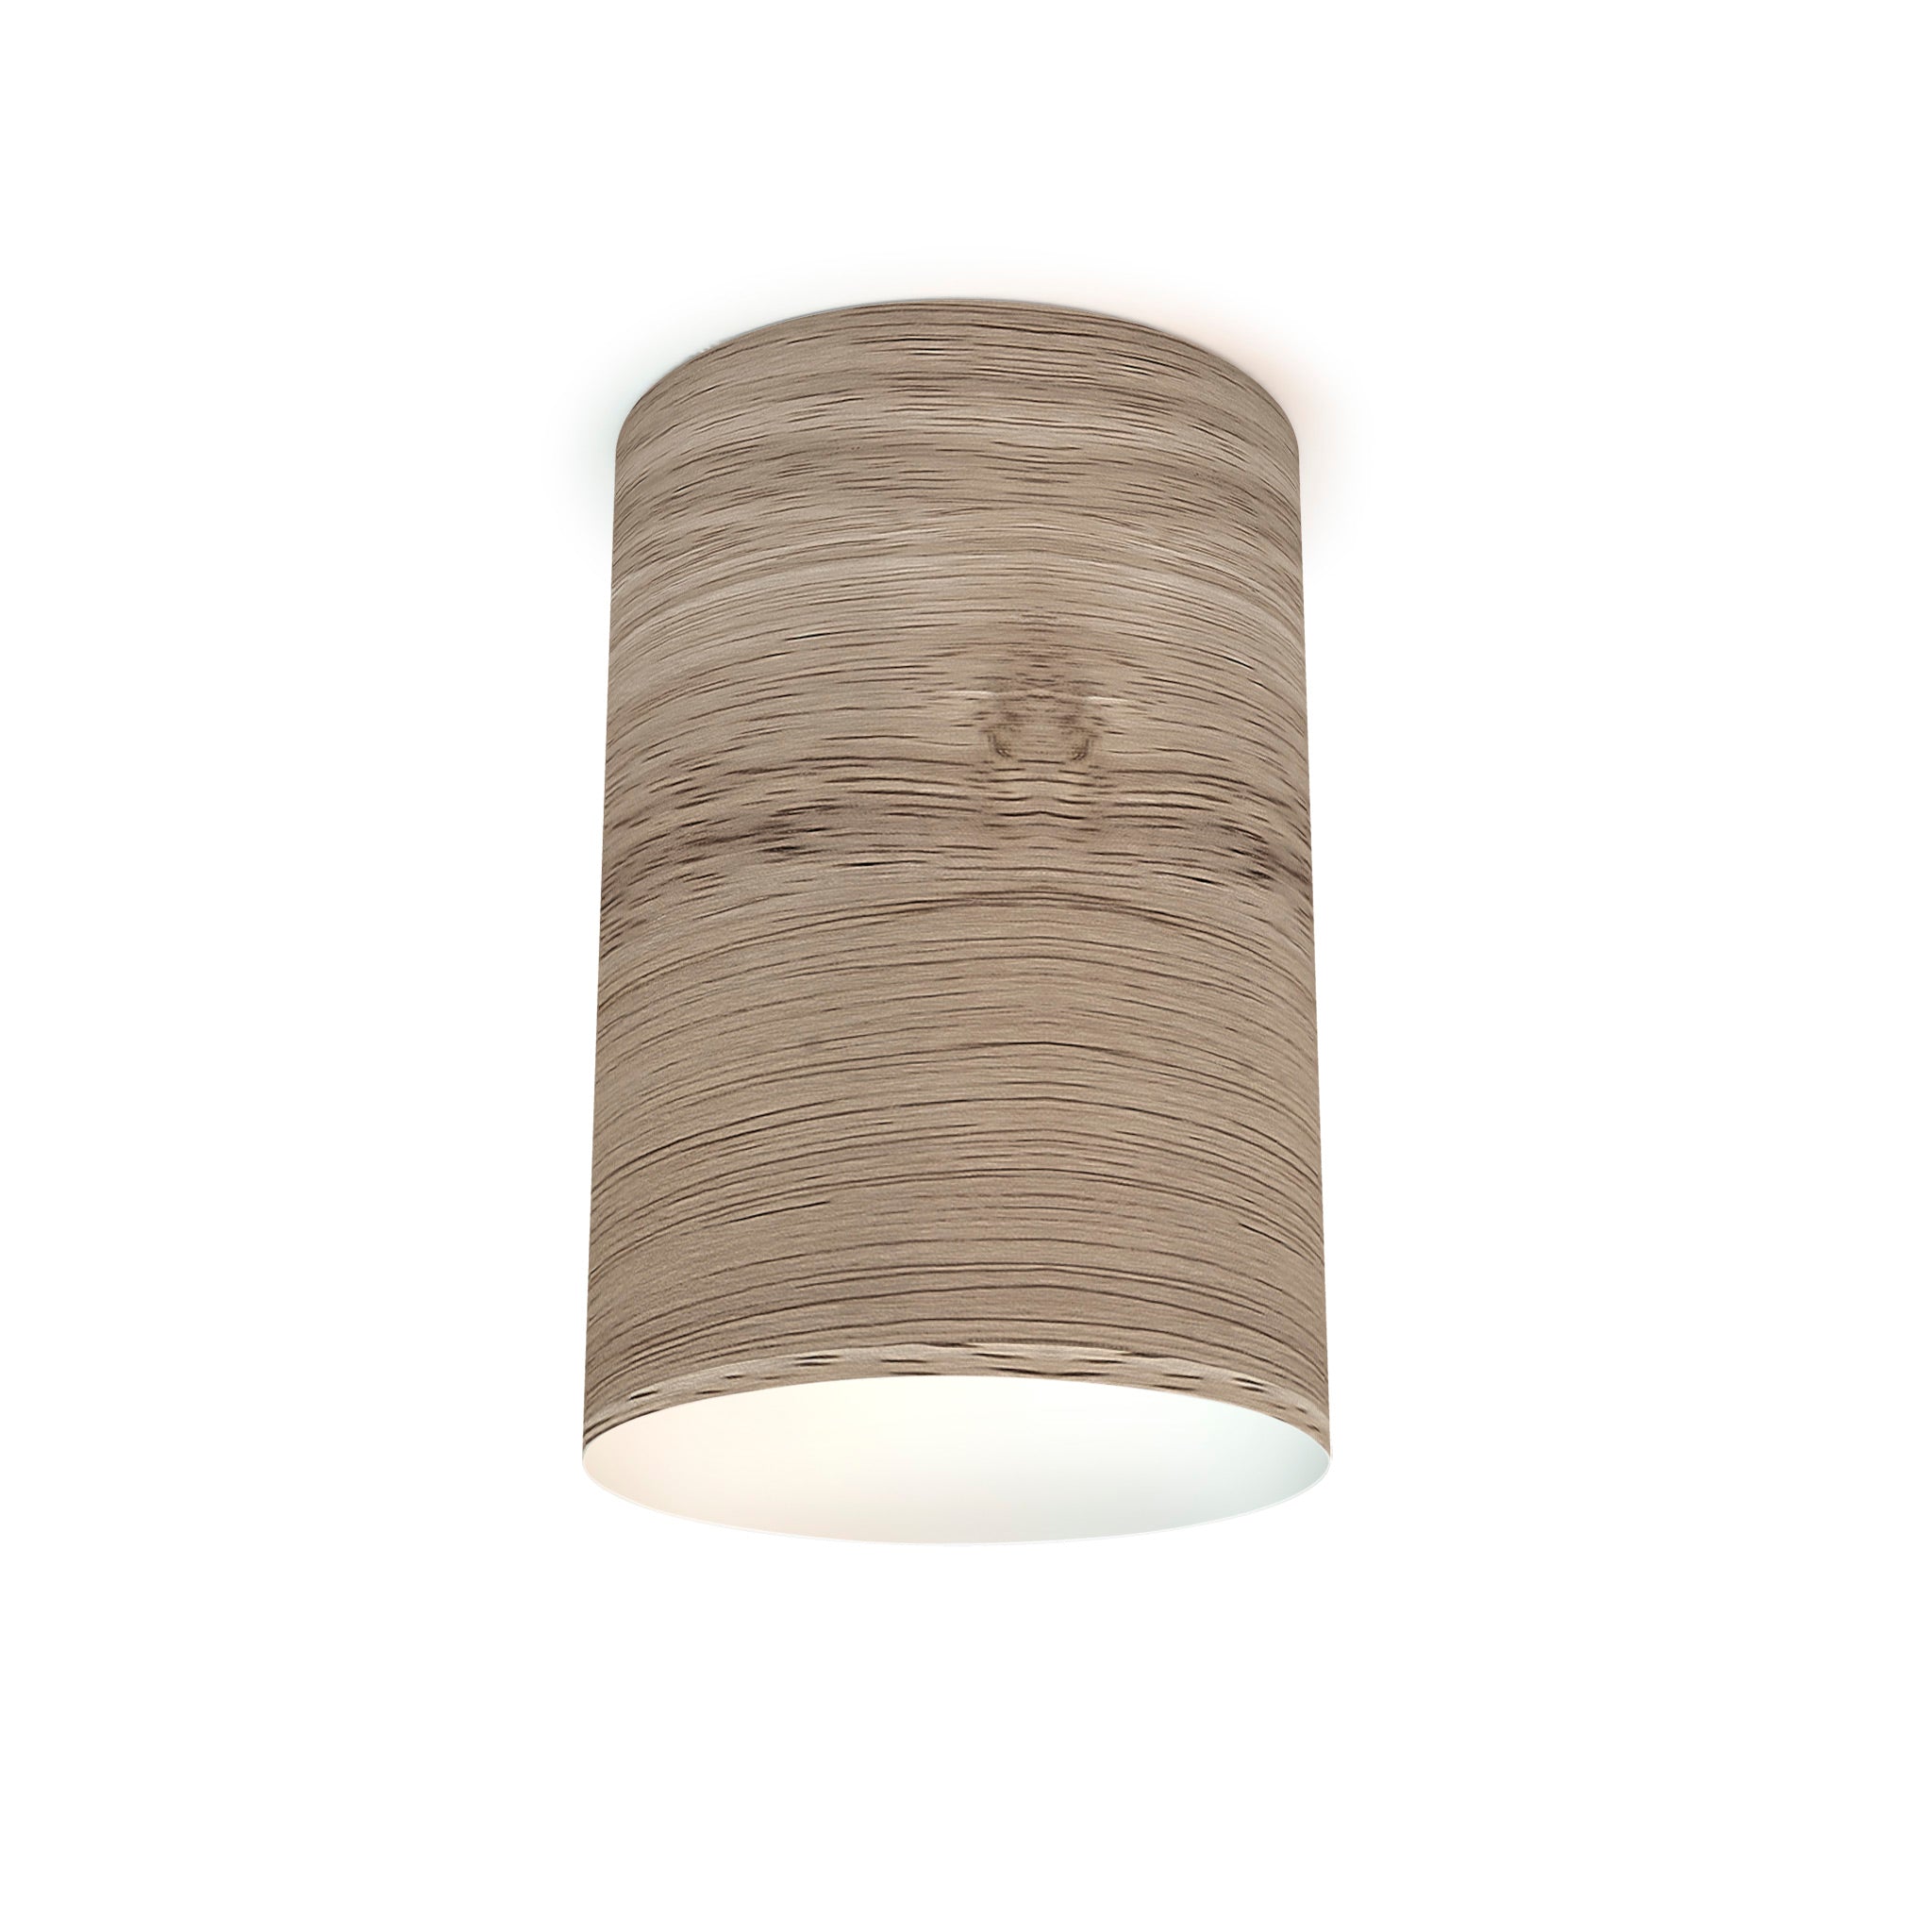 The Lily Flush Mount from Seascape Fixtures in photo veneer, natural color.